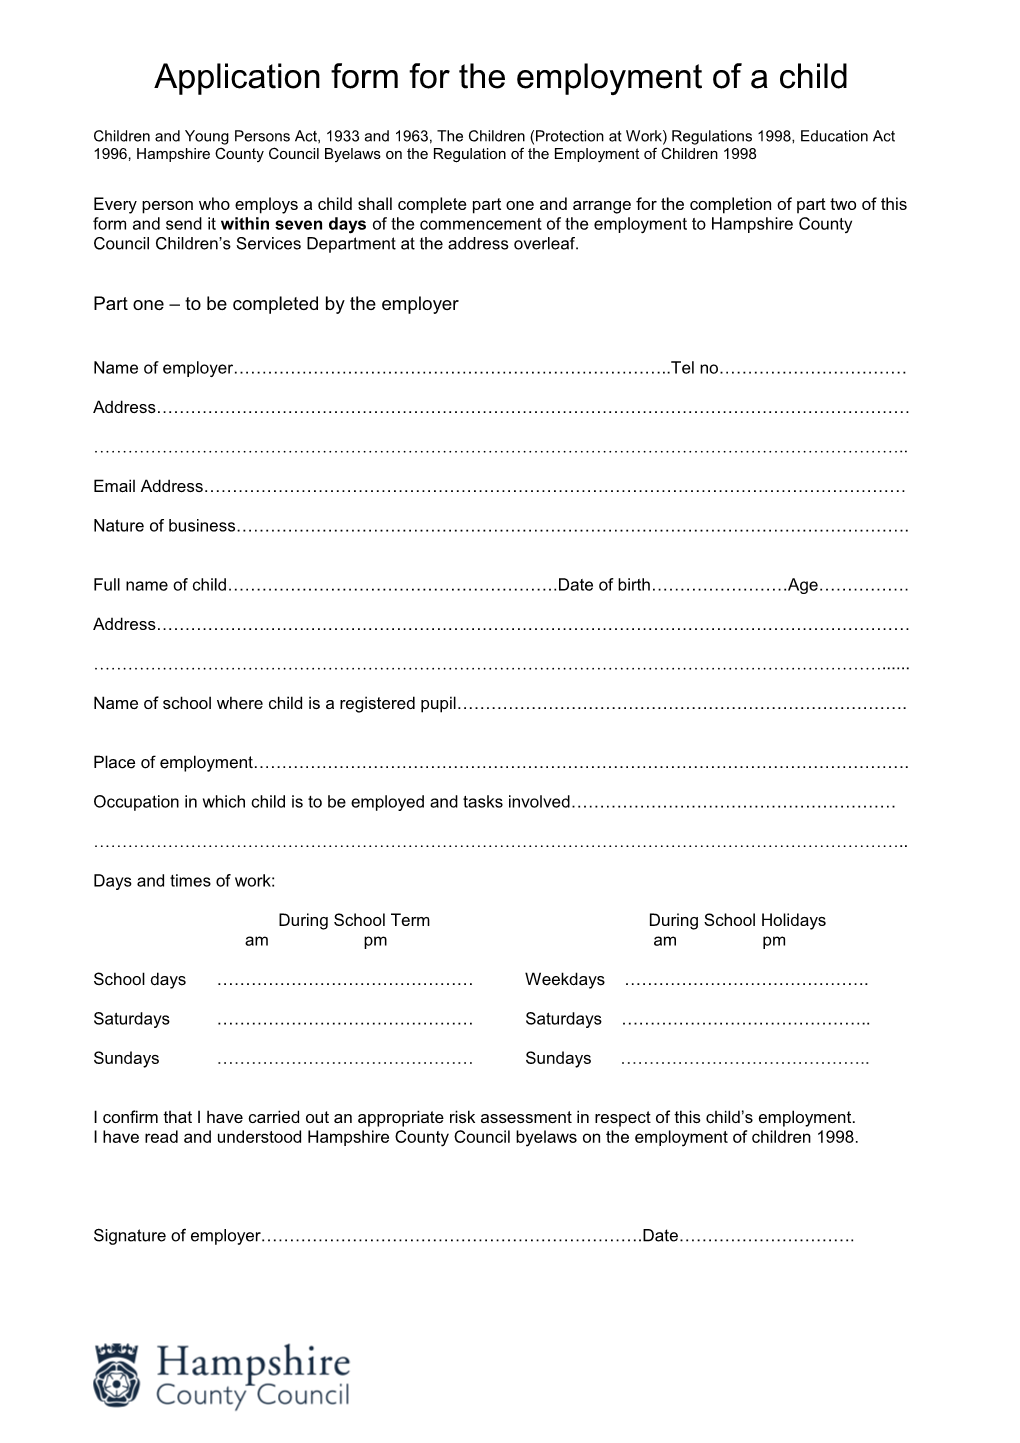 Application Form for the Employment of a Child